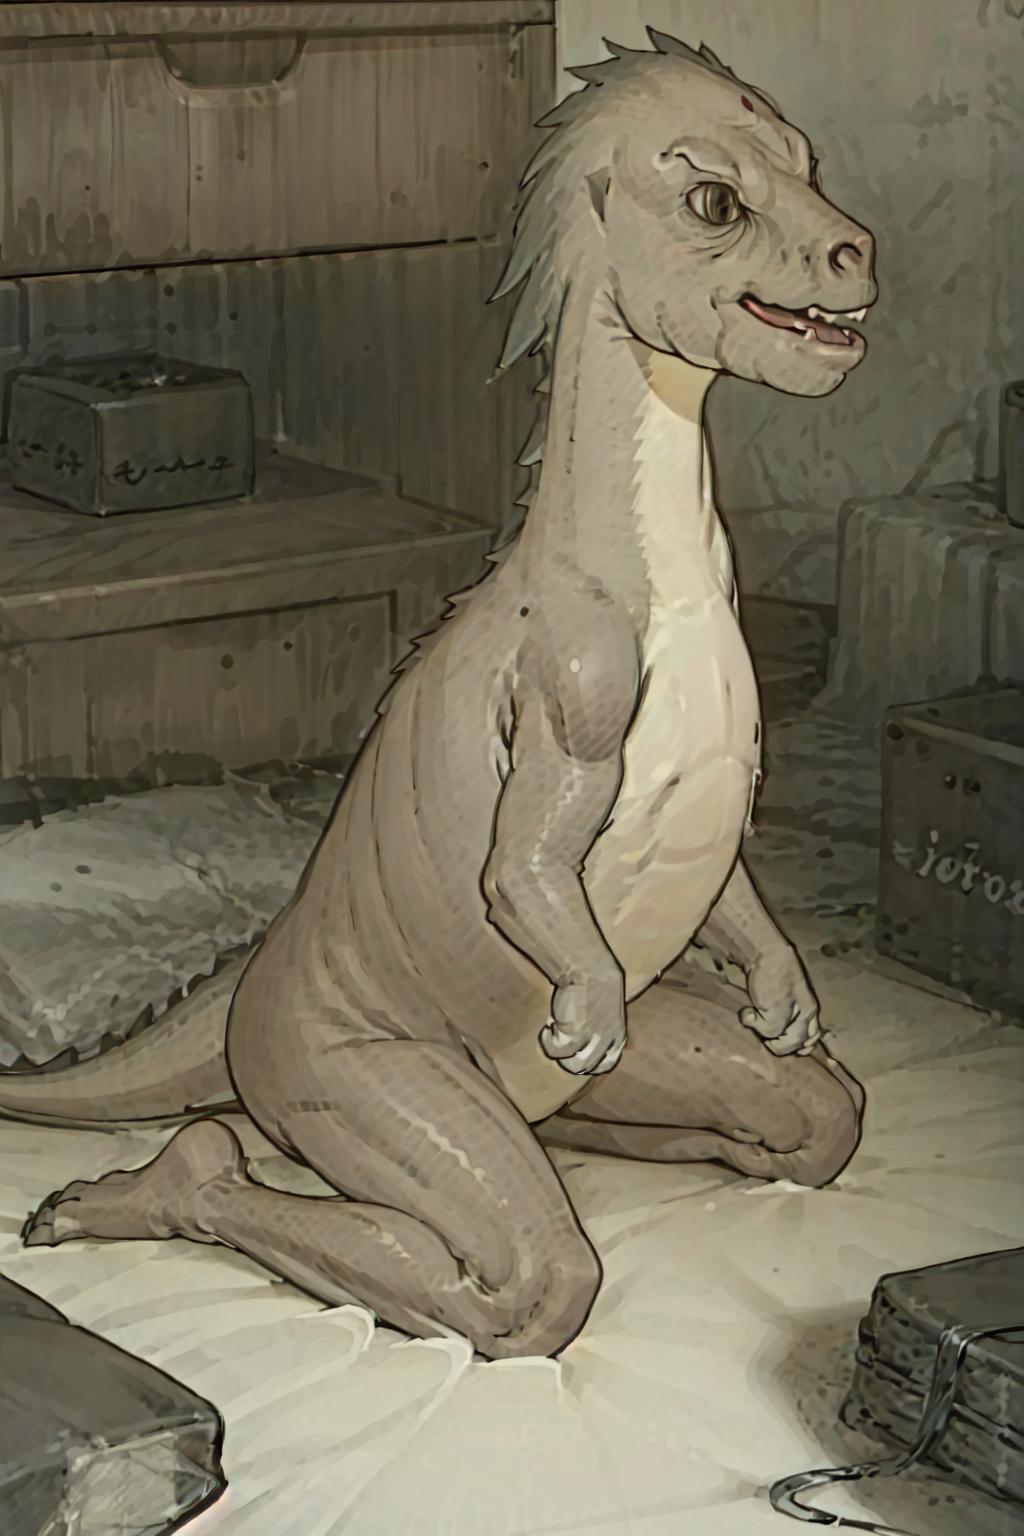 A cartoon image of a dinosaur, likely a dragon, sitting on a bed.